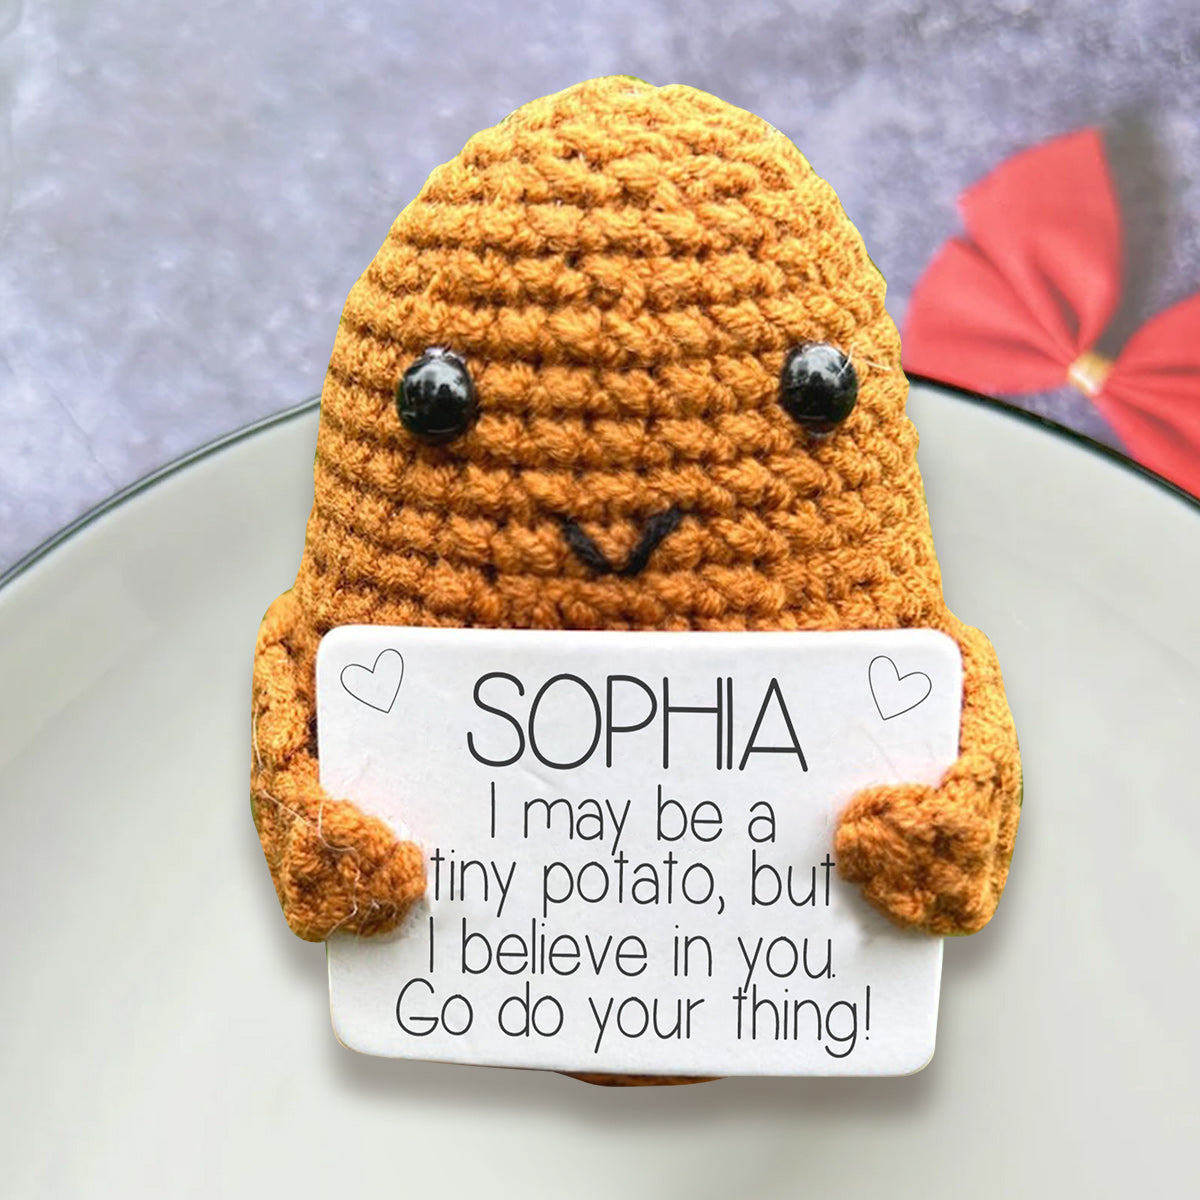 Positive Potato - Personalized Hand Knitted Figurine